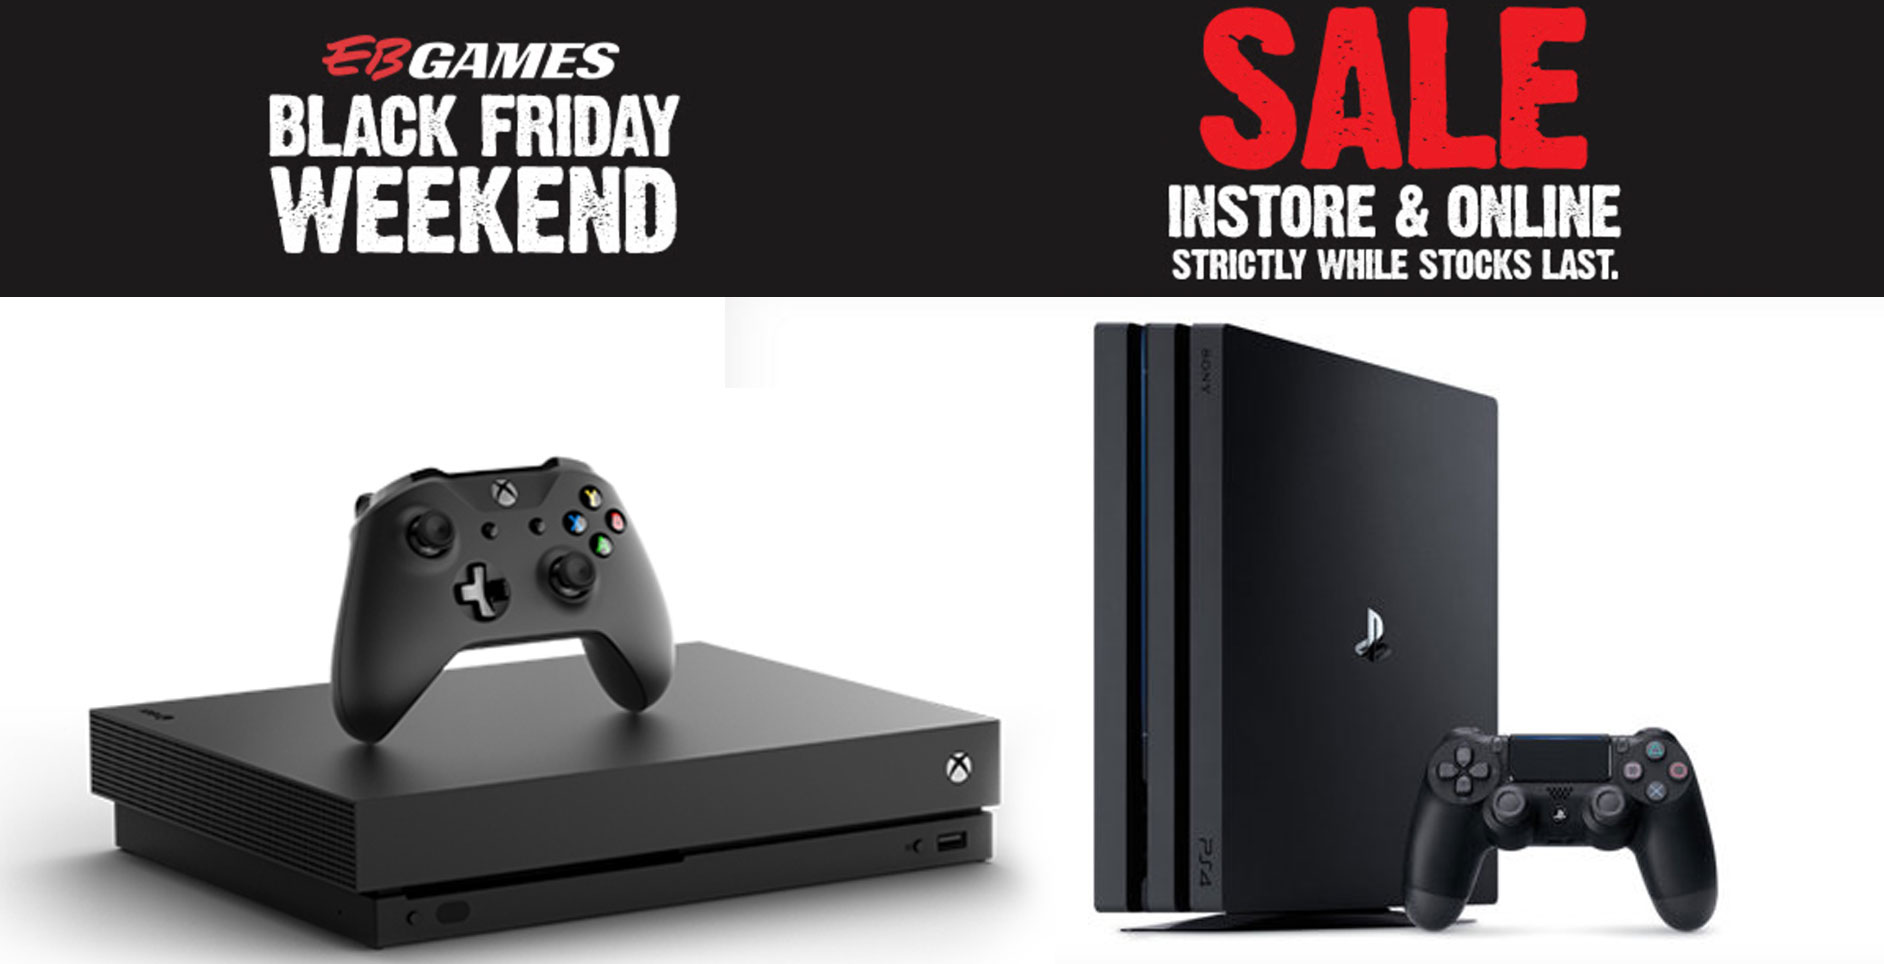 PlayStation and Xbox One X Bundles EB Games Black Friday Sale